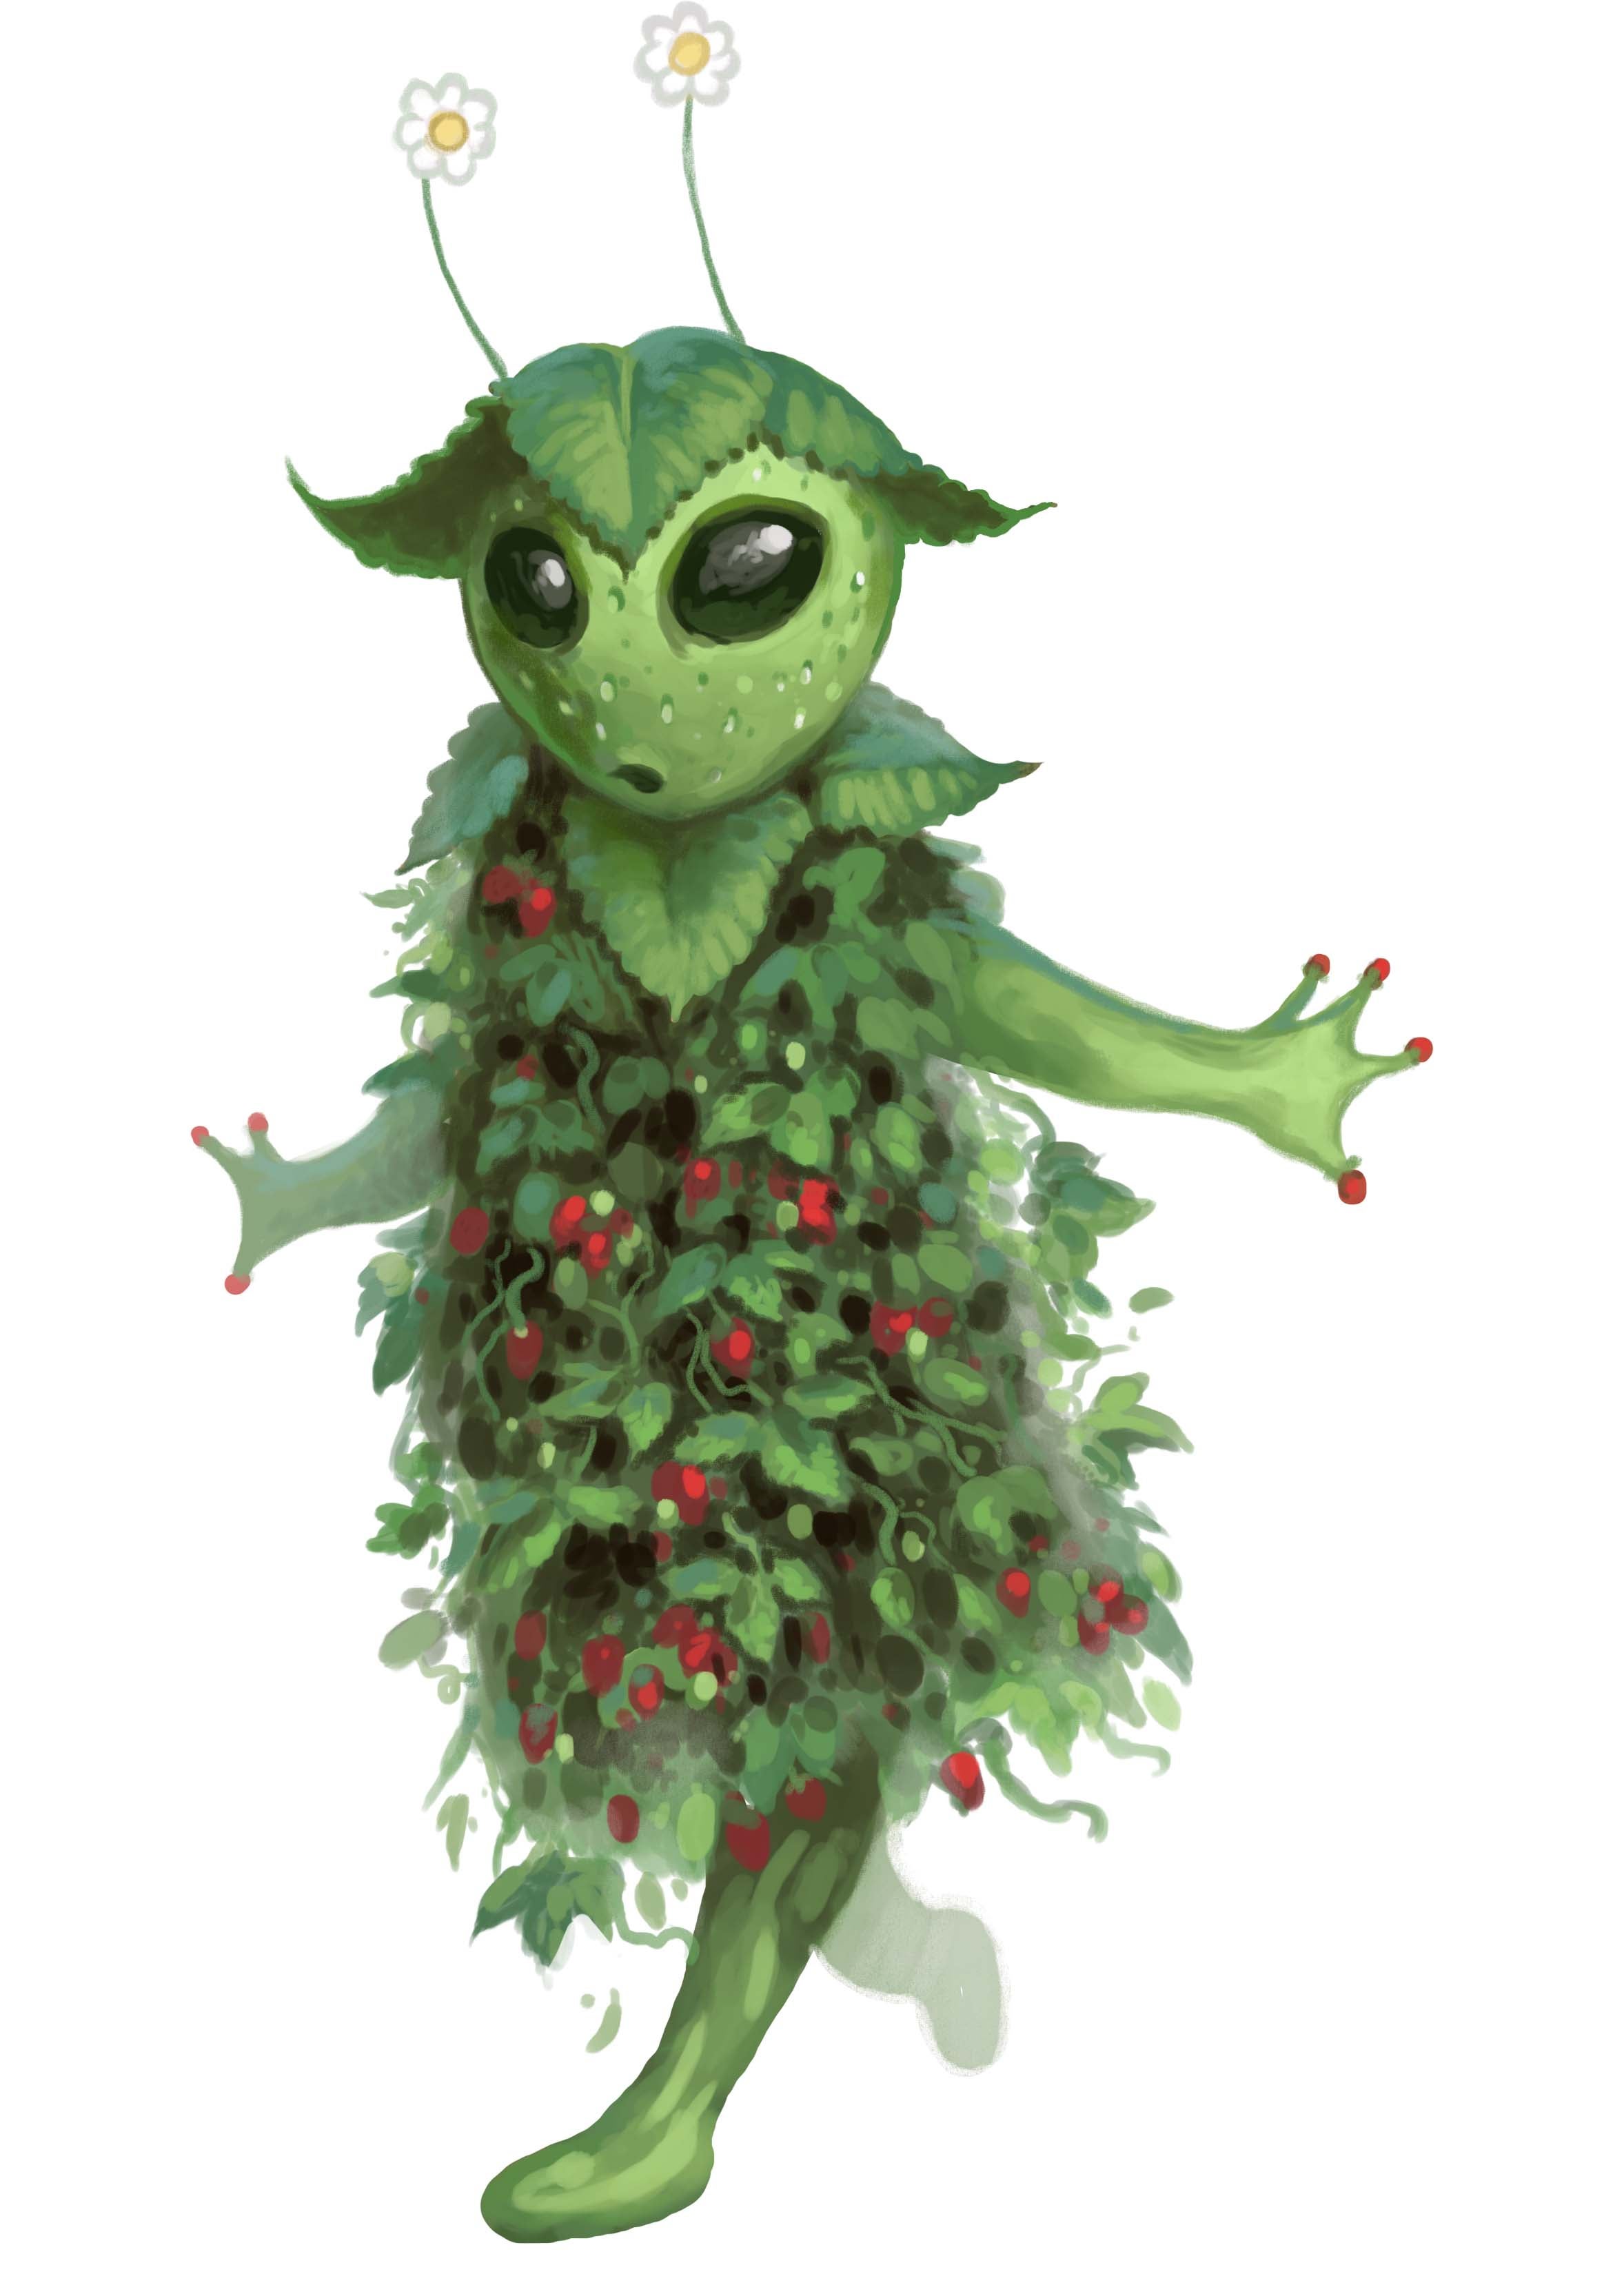 The most adorable fruit leshy you’ve ever seen, artist Alex Stone